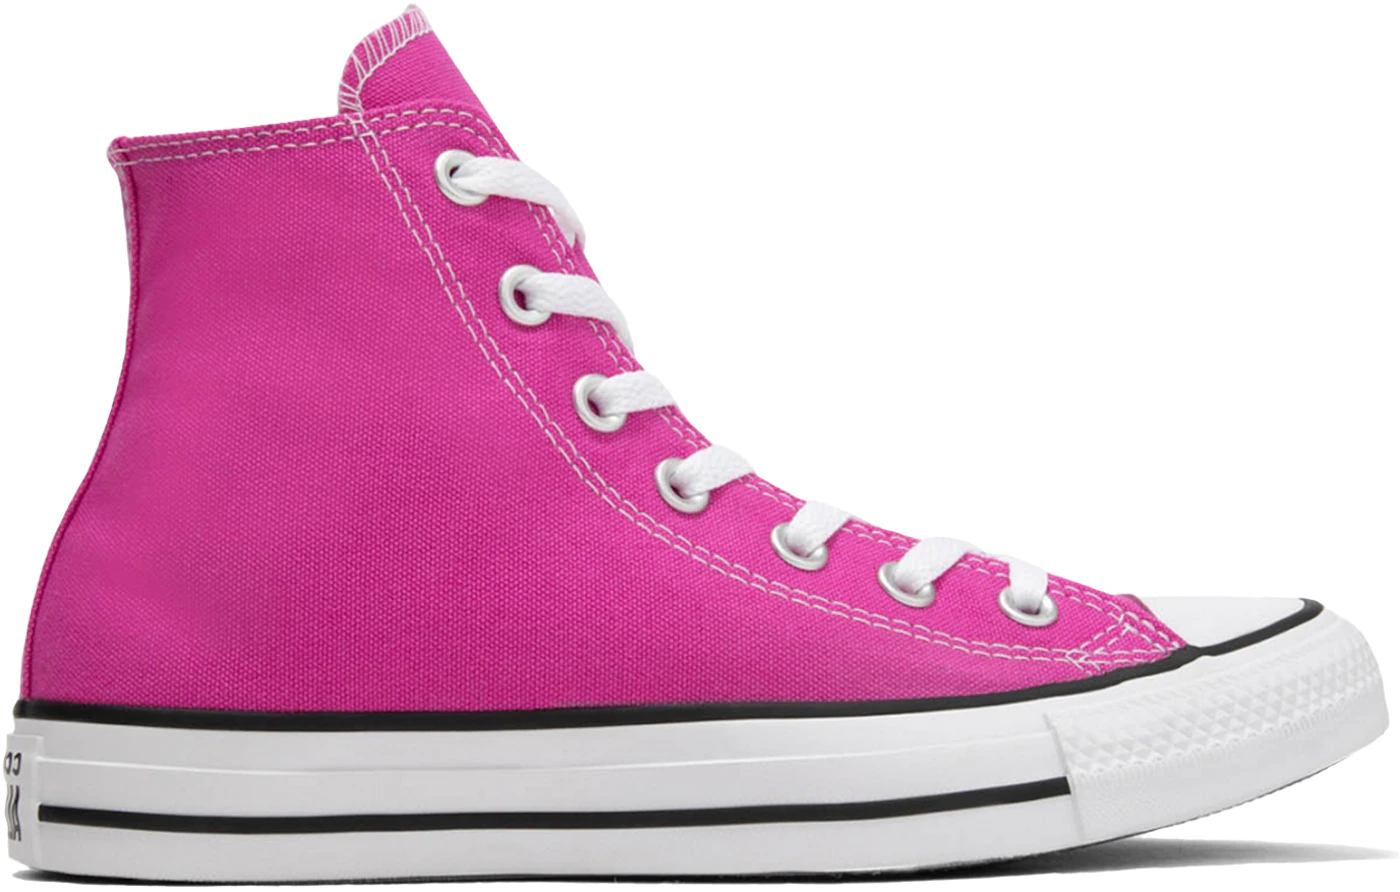 Converse Chuck Taylor All Star Hi Sneakers in Fuchsia Pink